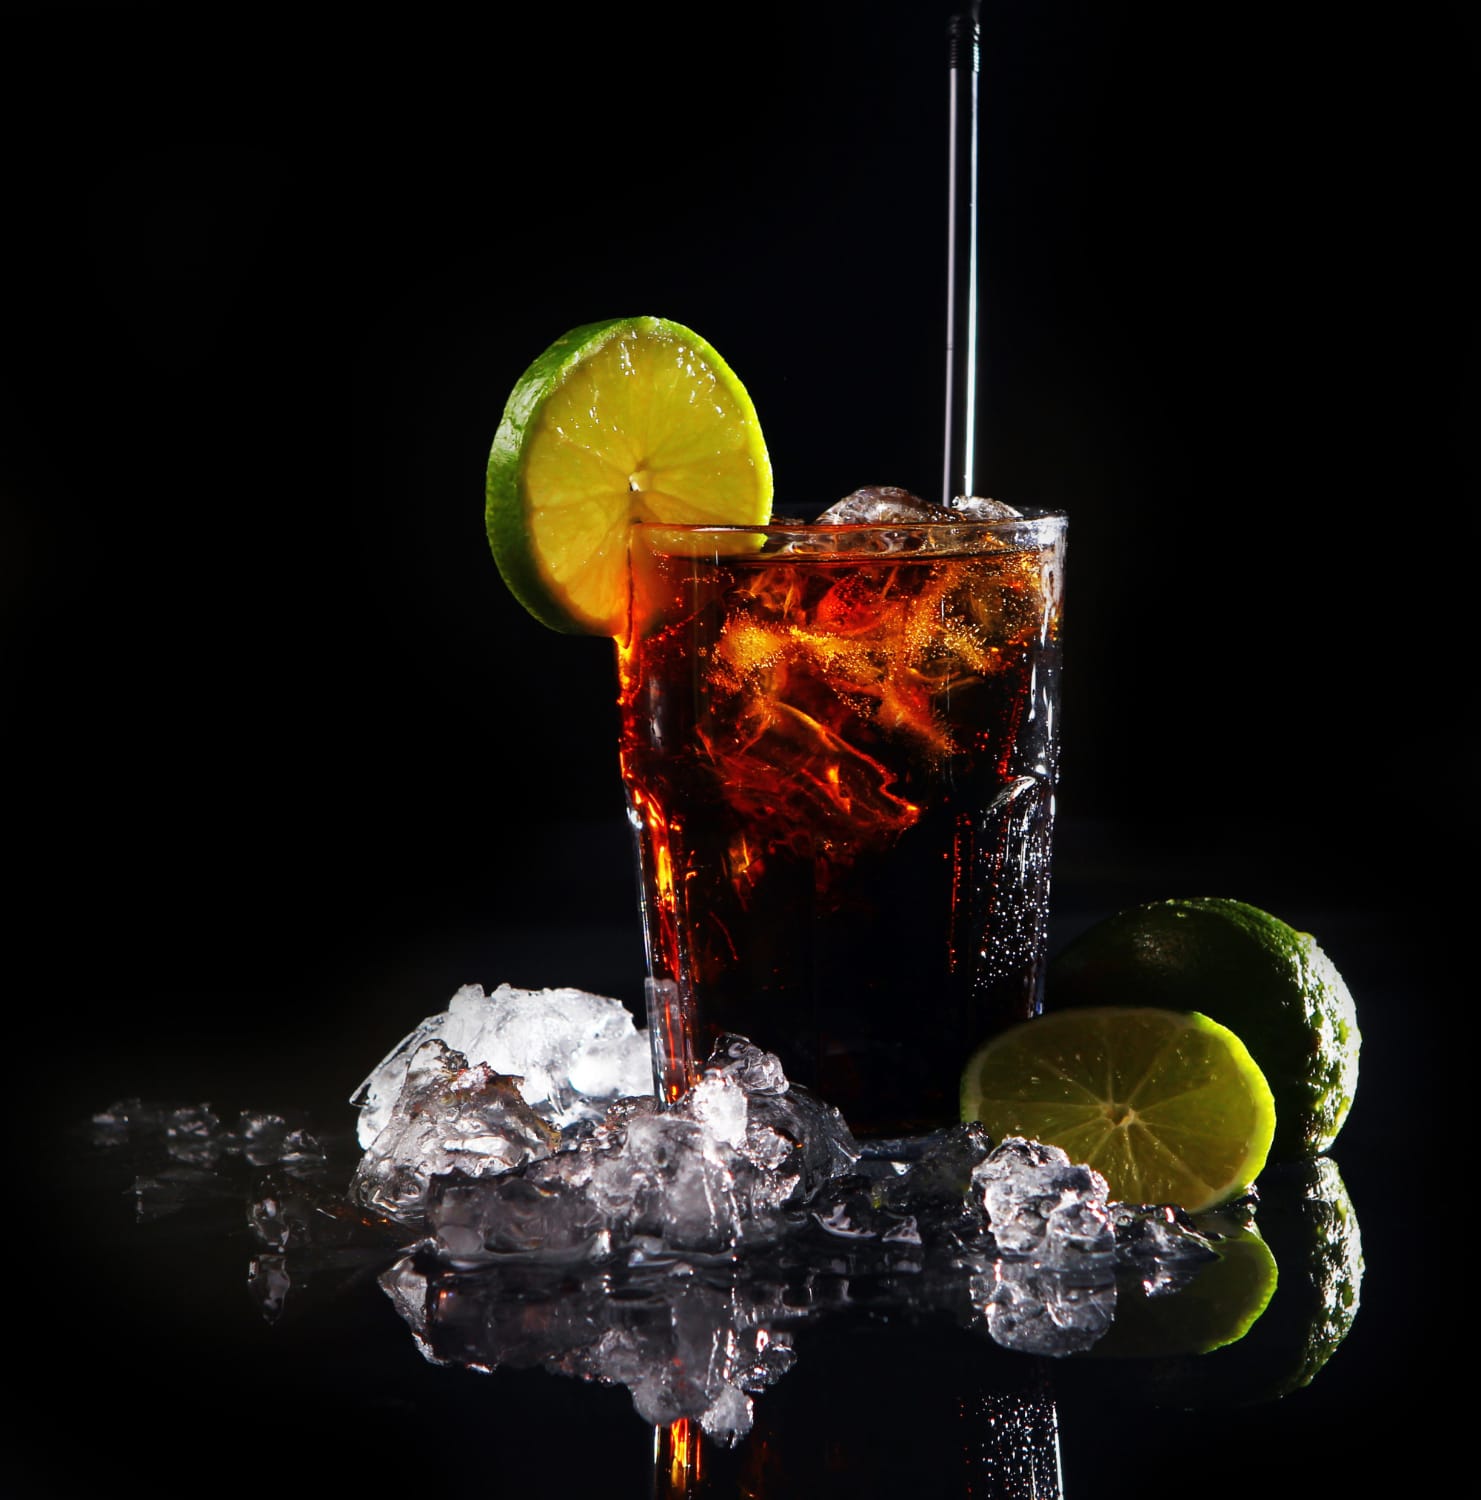 What Does Your Daily Soft Drink Cost Your Smile?